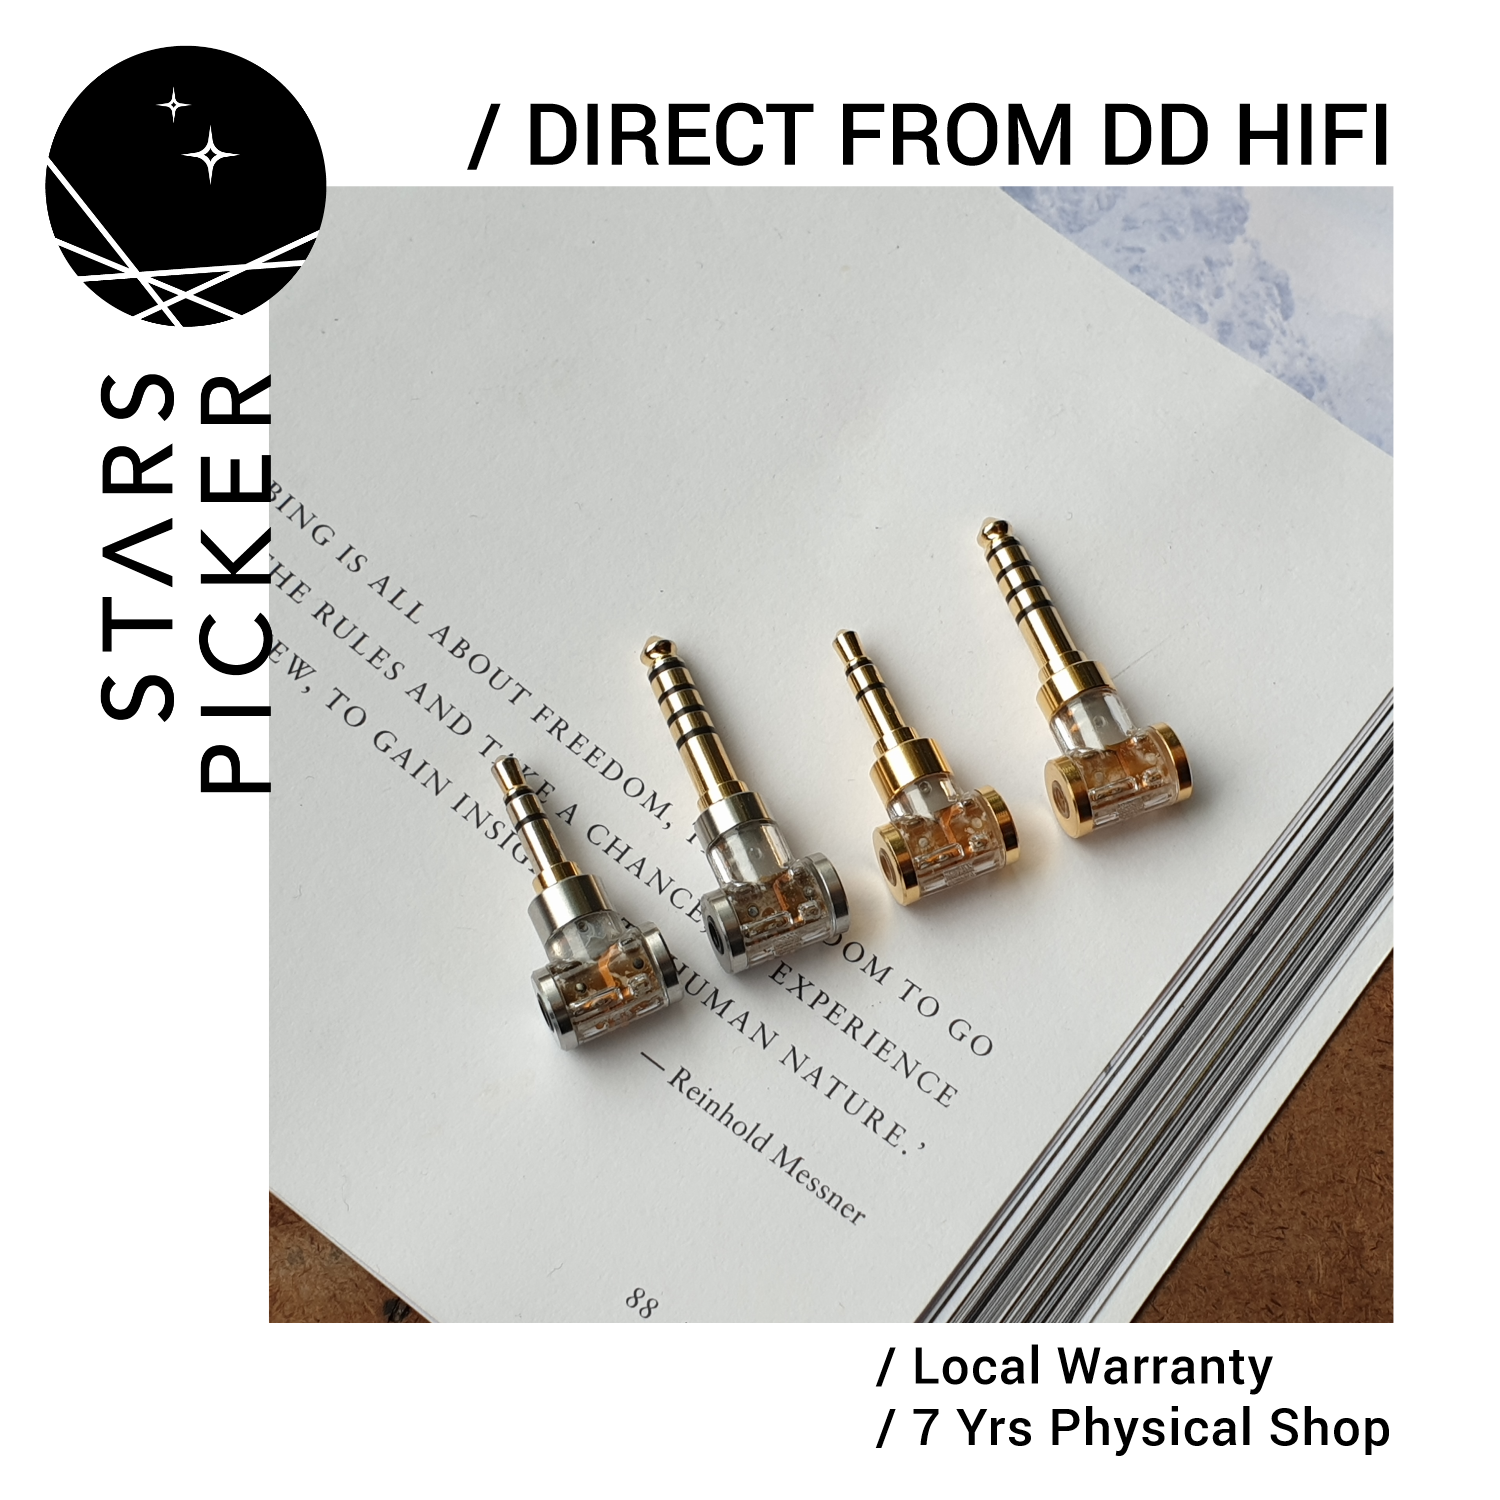 [5% off] ddhifi DD HIFI DJ44A / DJ35A / DJ44AG / DJ35AG - 2.5mm BAL. female to 3.5mm/4.4mm male Adapter Plug